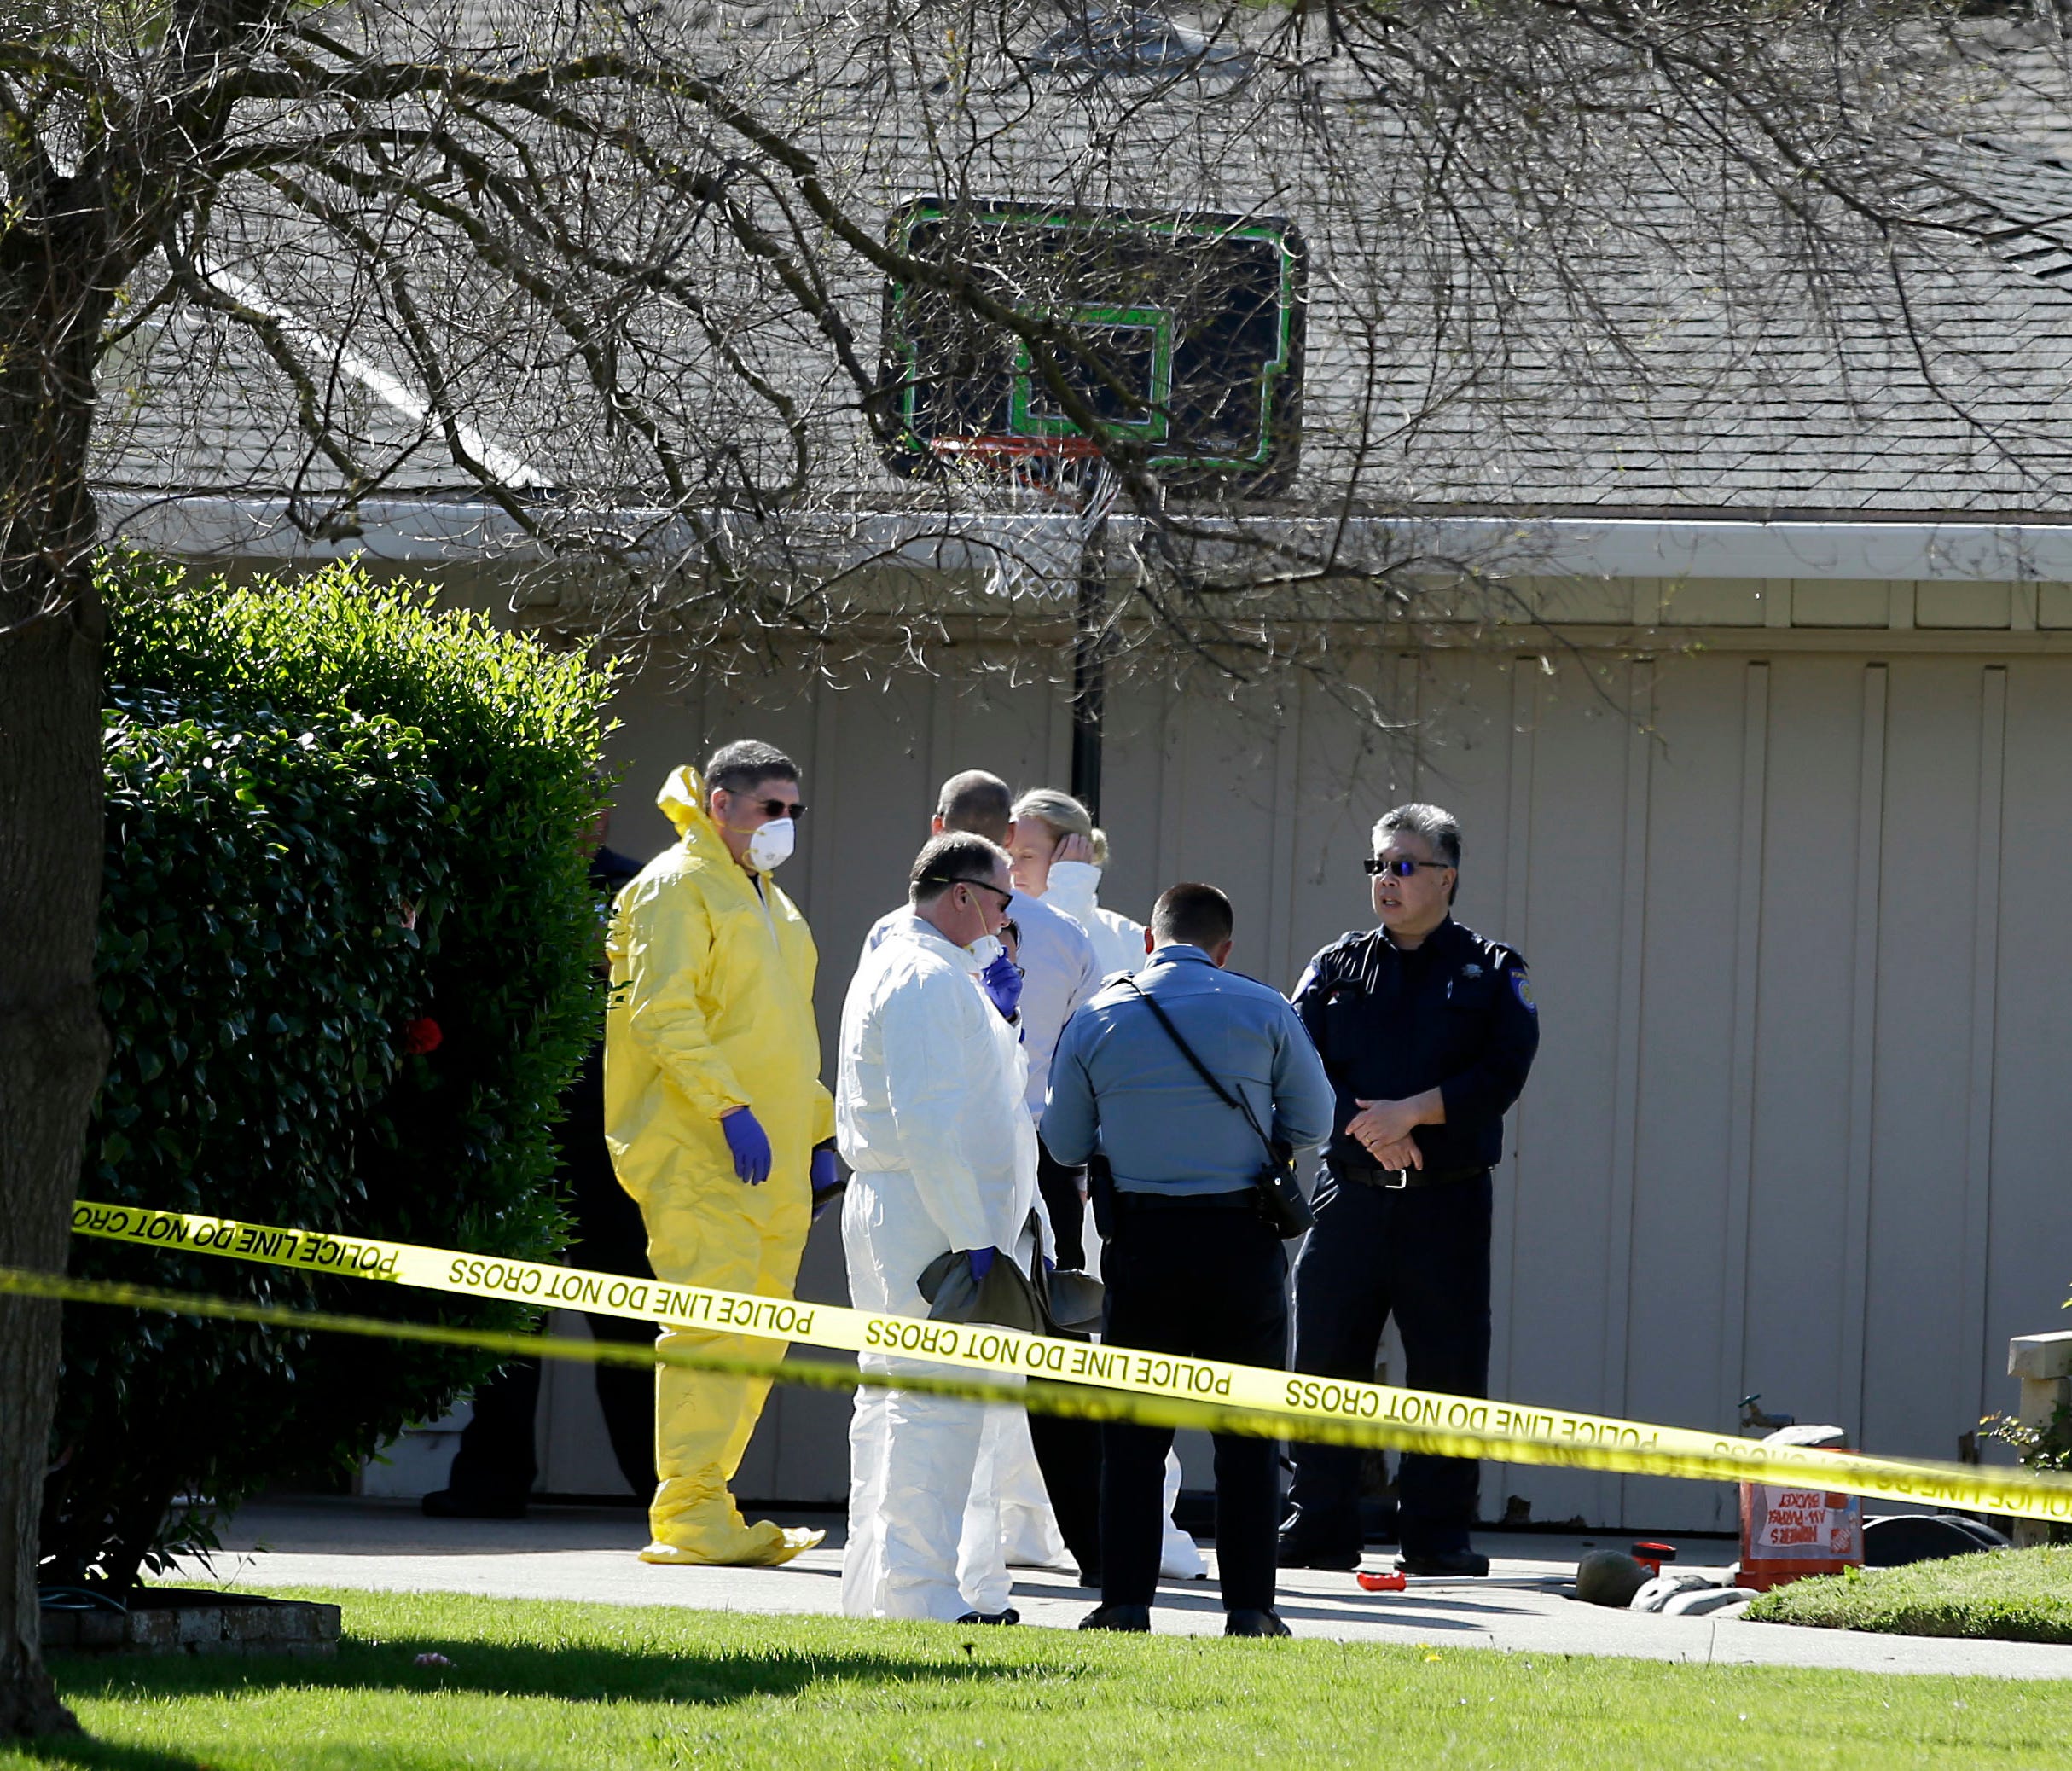 Investigators gather outside a home where four people were found dead, Thursday, March 23, 2017, in Sacramento, Calif.